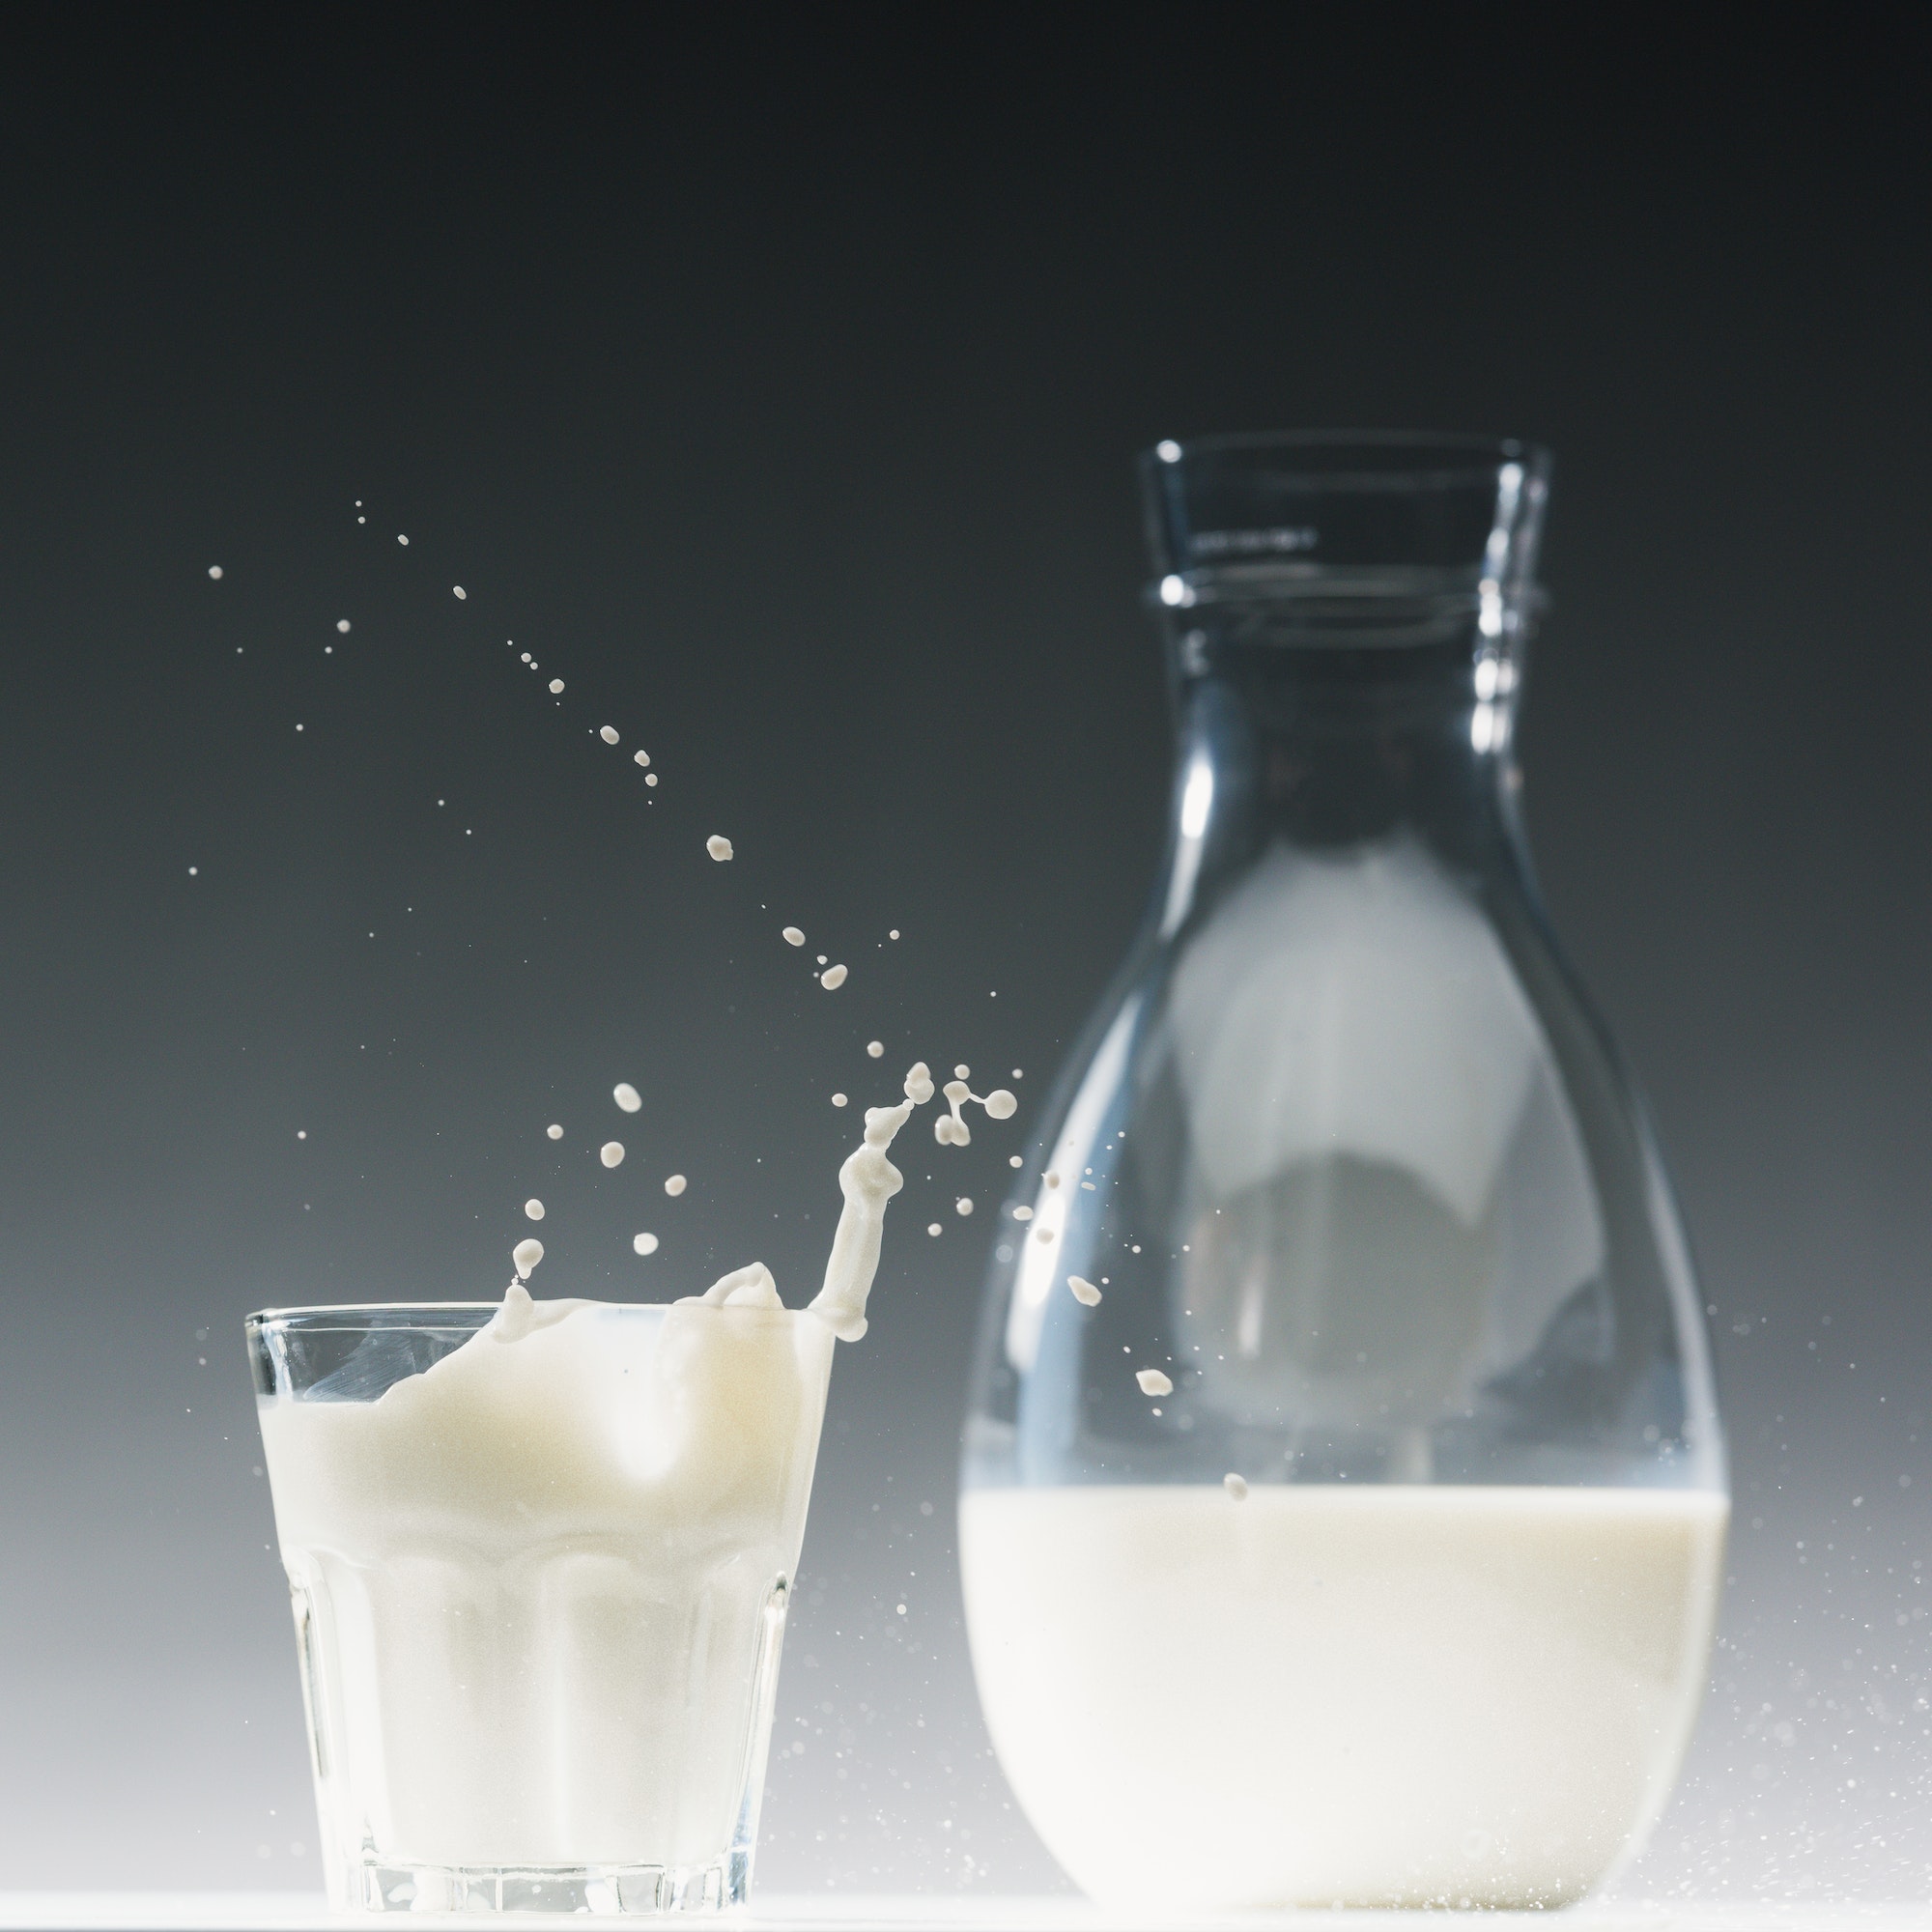 Glass of milk with splashes in front of milk bottle